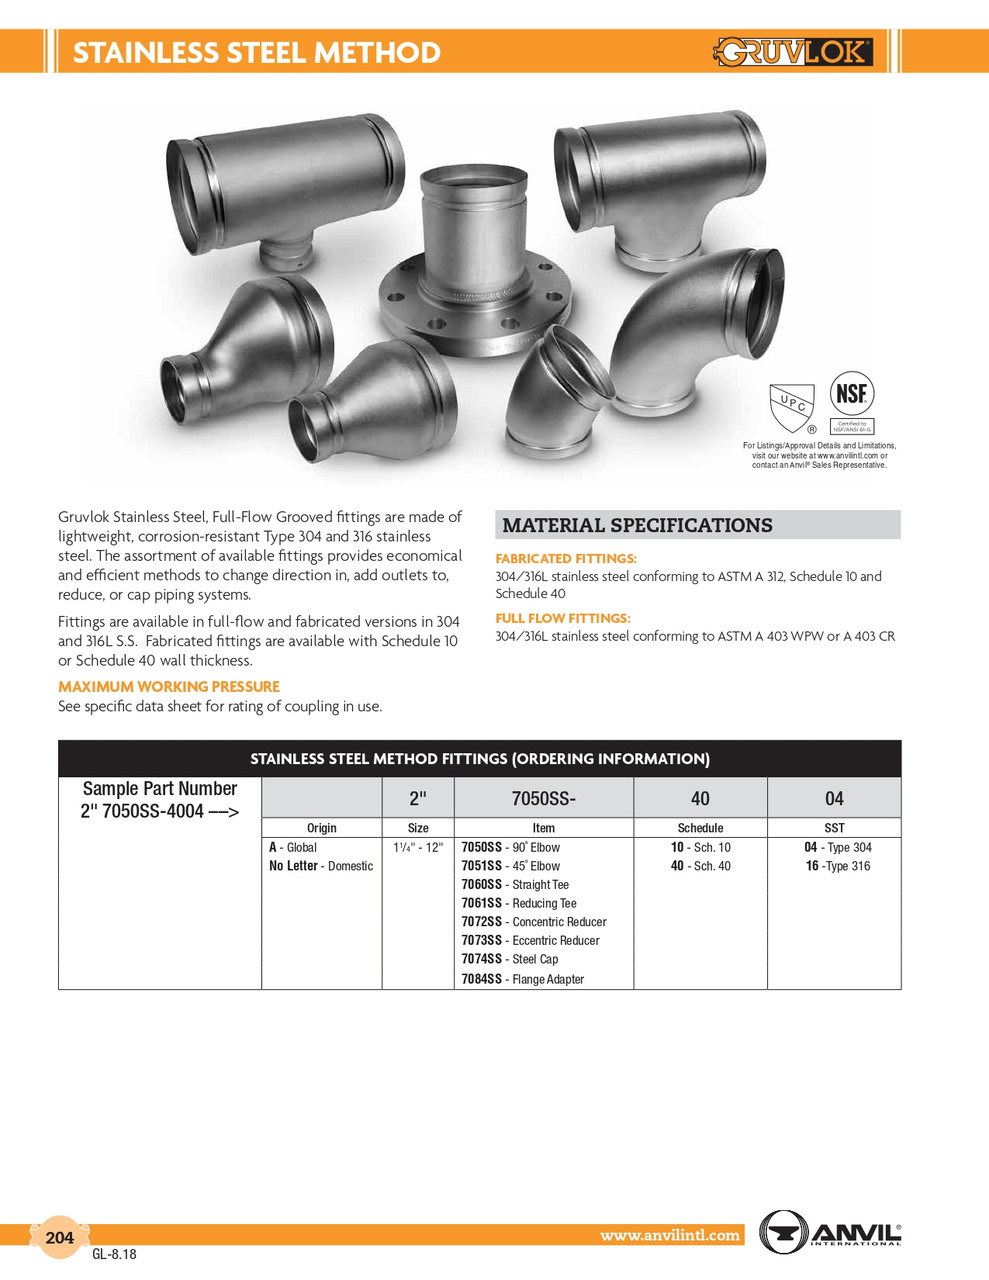 Fig. A7072SS Stainless Concentric Reducer 5 x 3"